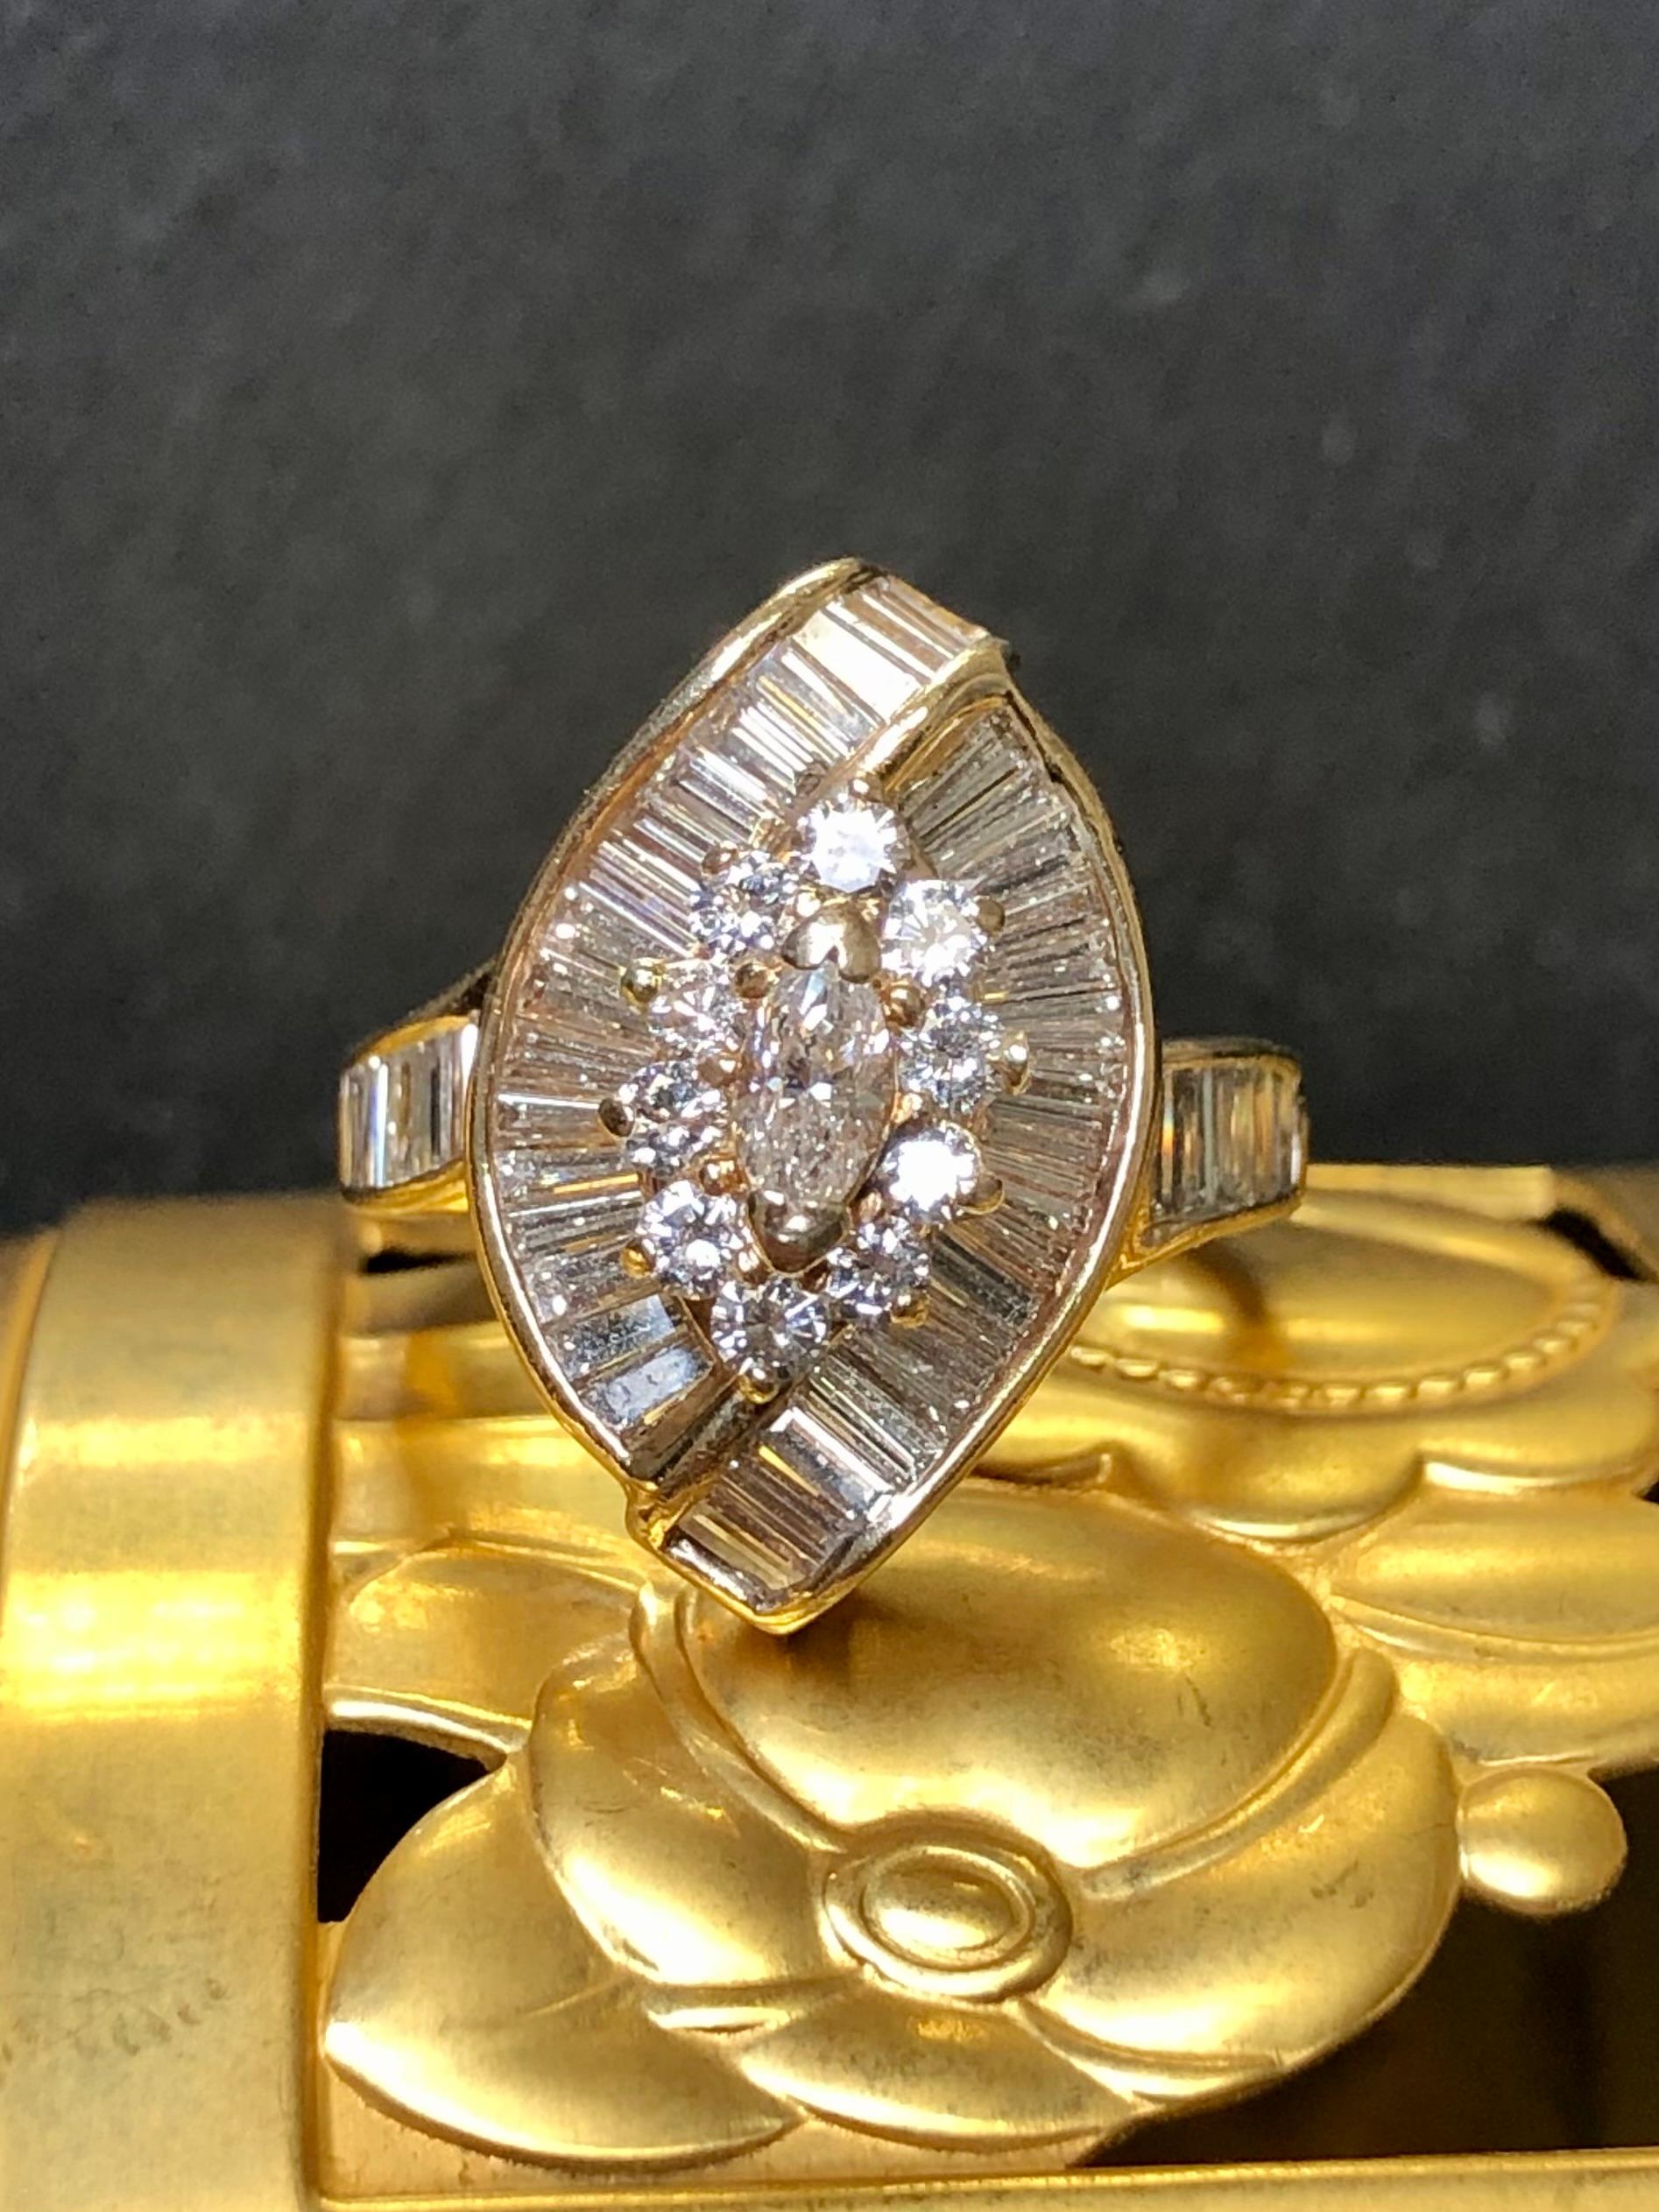 A gorgeous ring crafted in 14K yellow gold and channel/prong set with approximately 3.20cttw in H-I color Vs1-2 clarity baguette and round diamonds as well as one central marquise diamond. A fabulous show on the hand!


Dimensions/Weight:

Ring